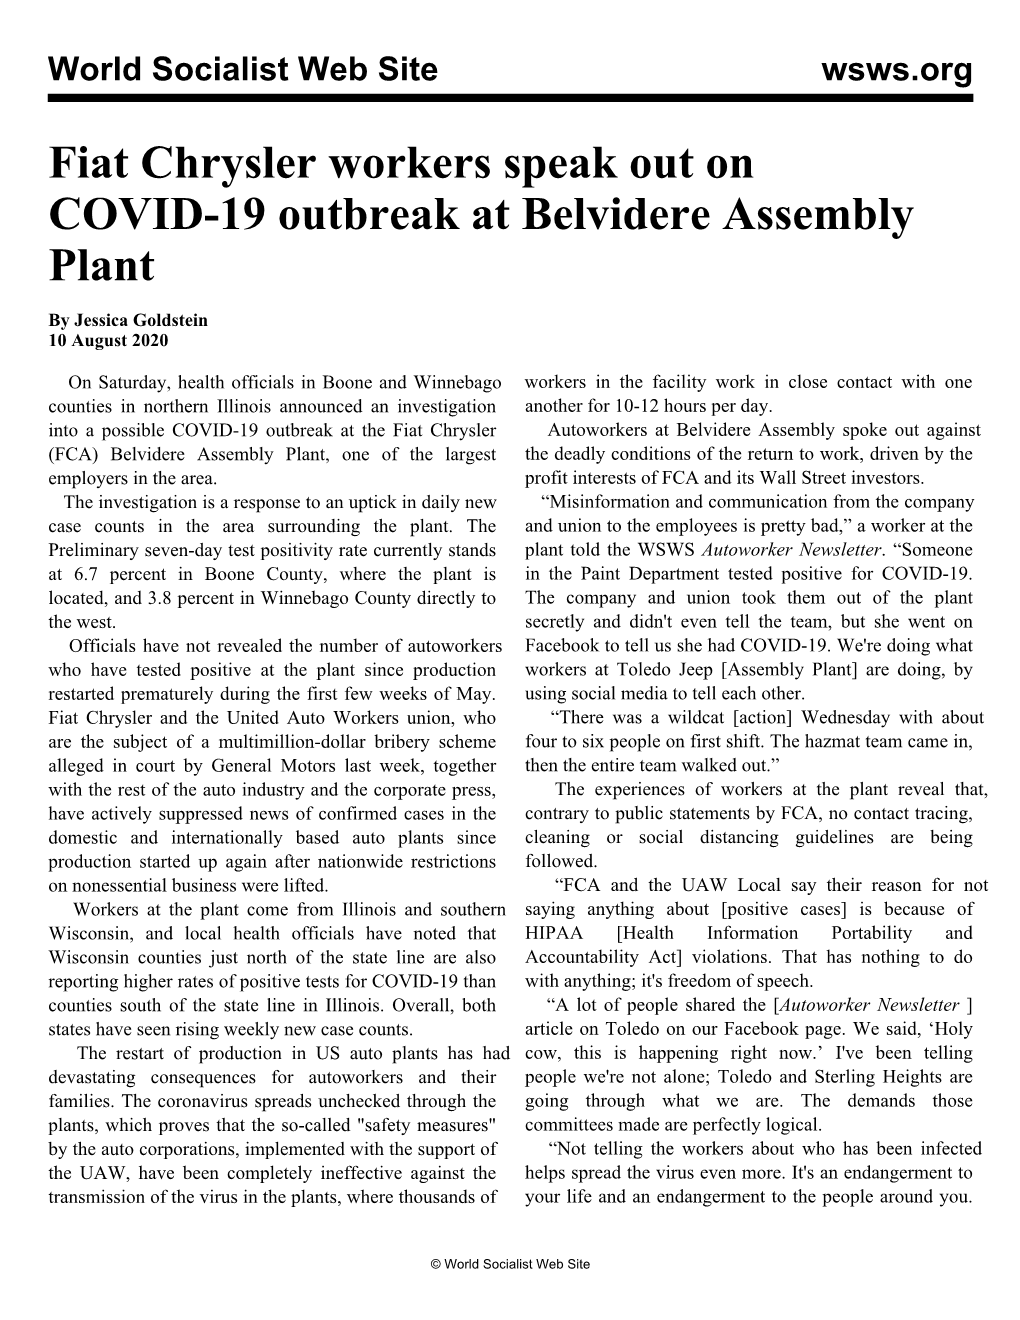 Fiat Chrysler Workers Speak out on COVID-19 Outbreak at Belvidere Assembly Plant